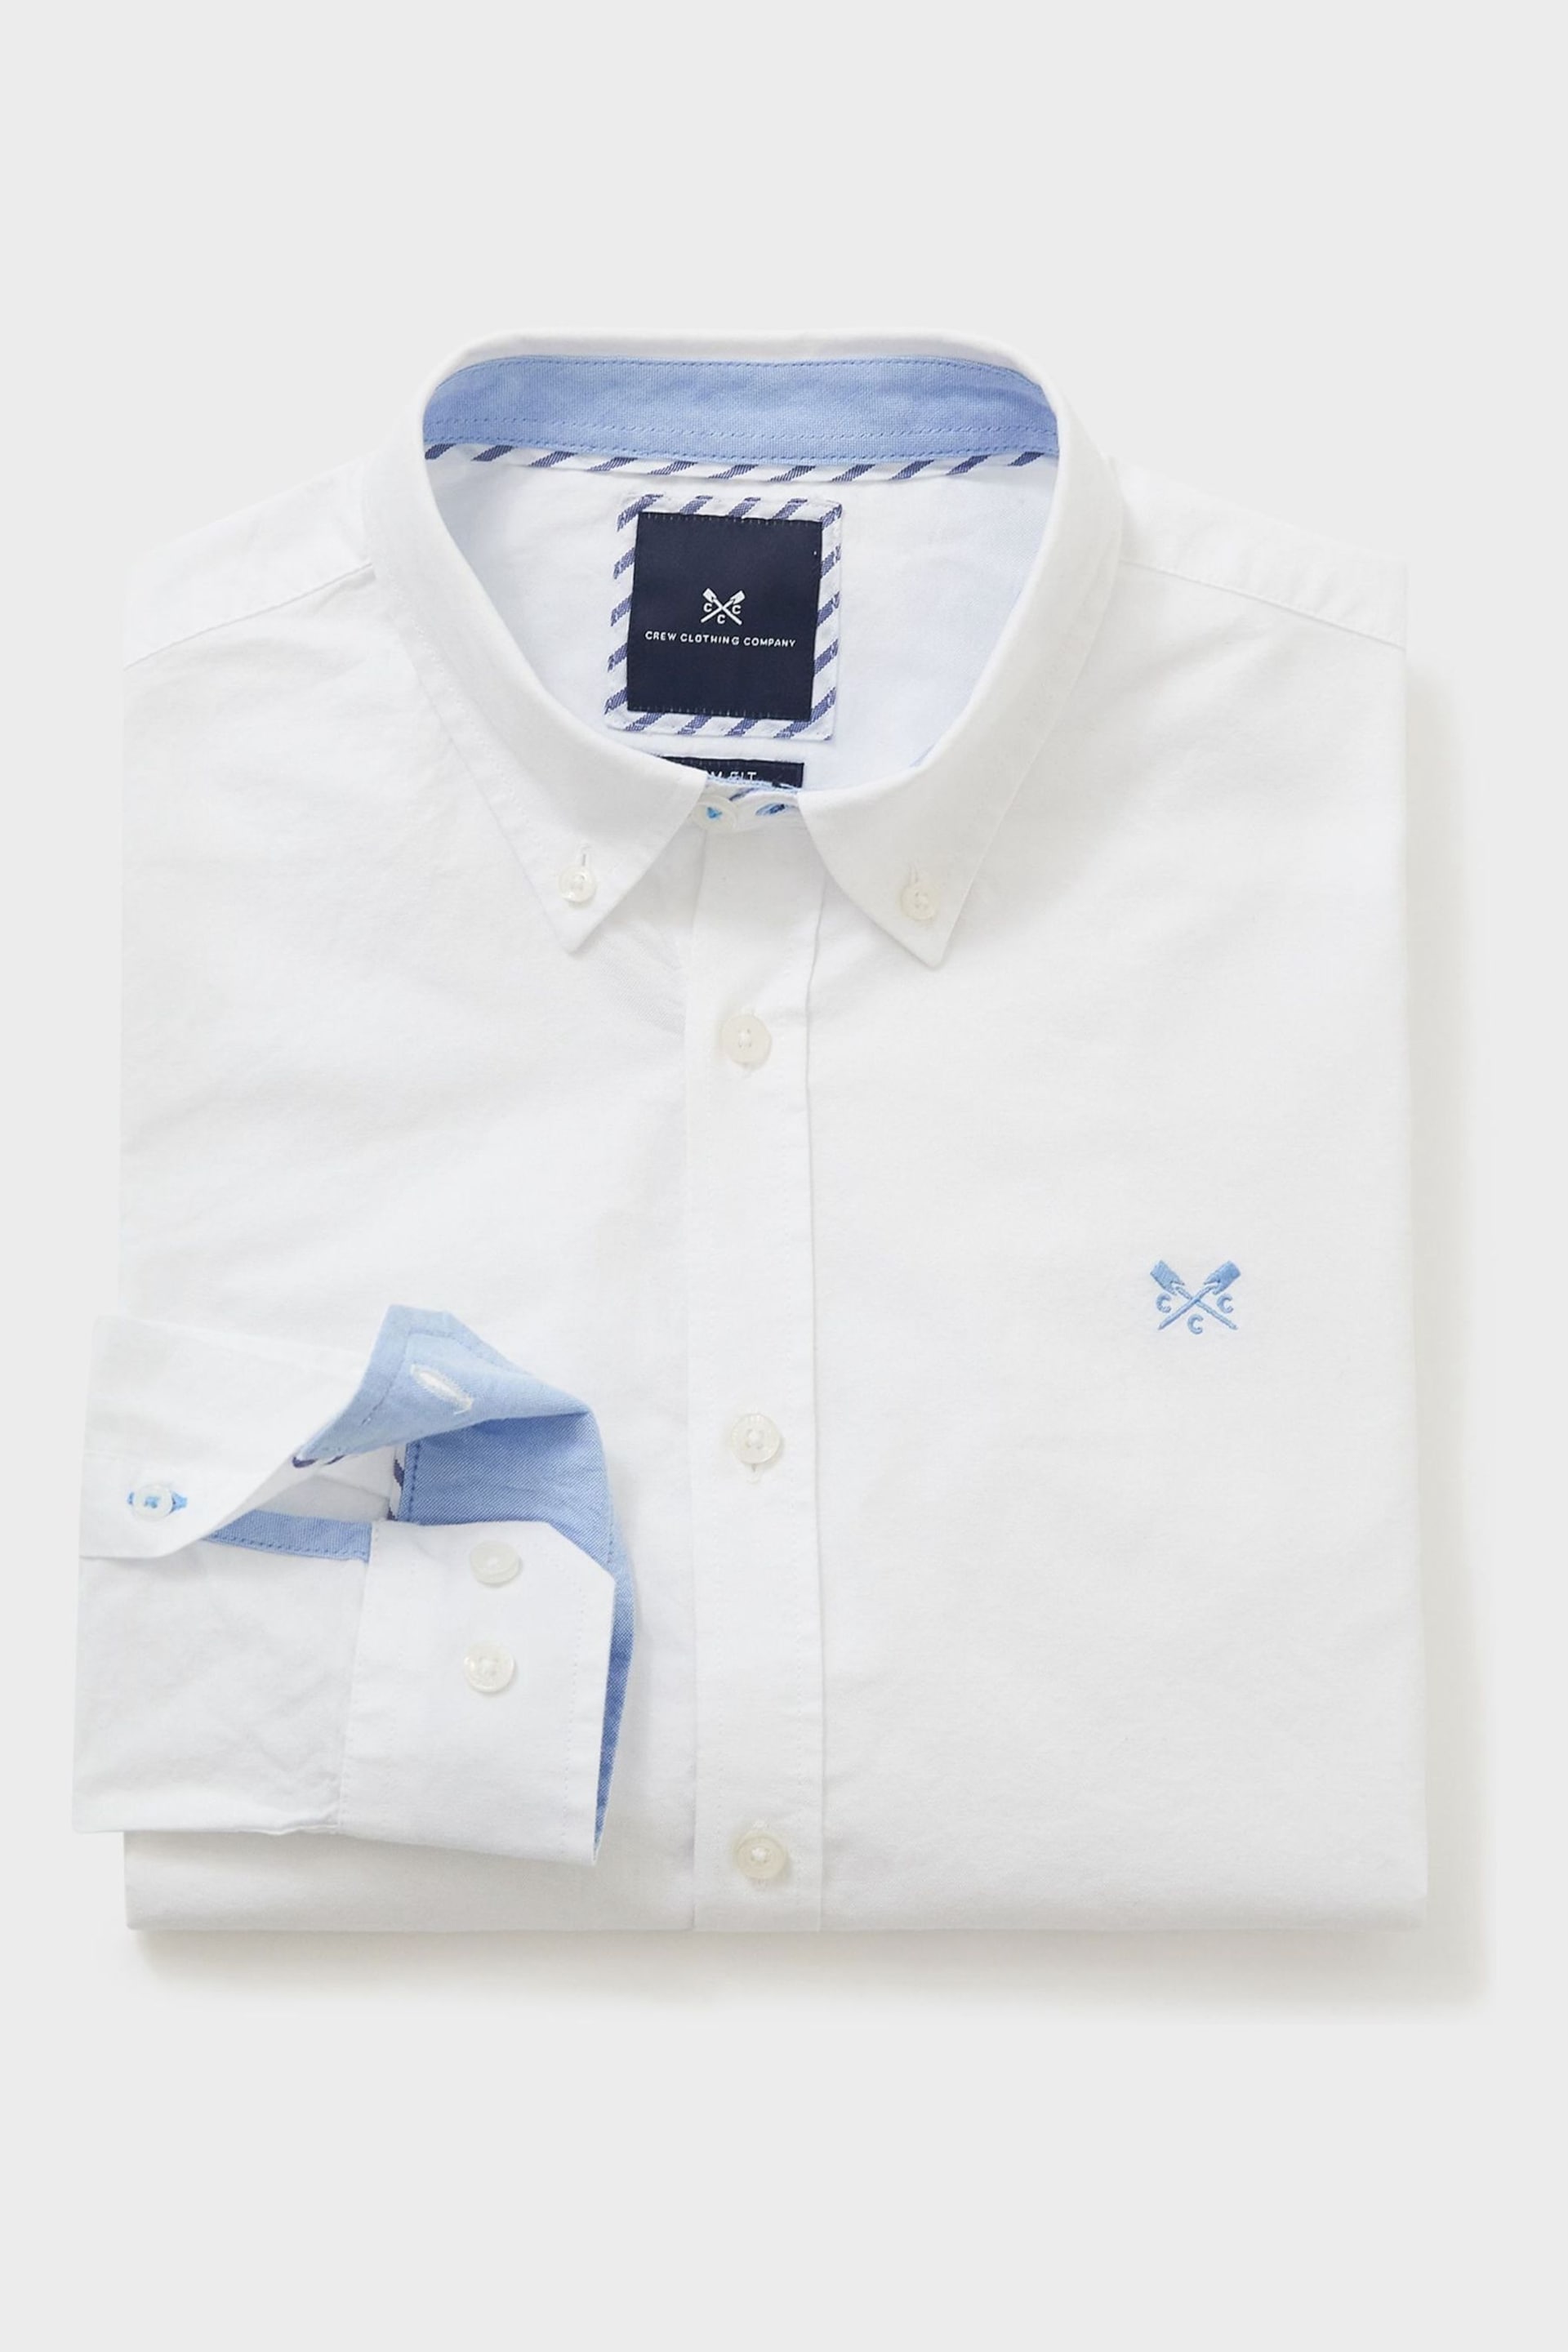 Crew Clothing Company Cotton Classic Shirt - Image 4 of 4